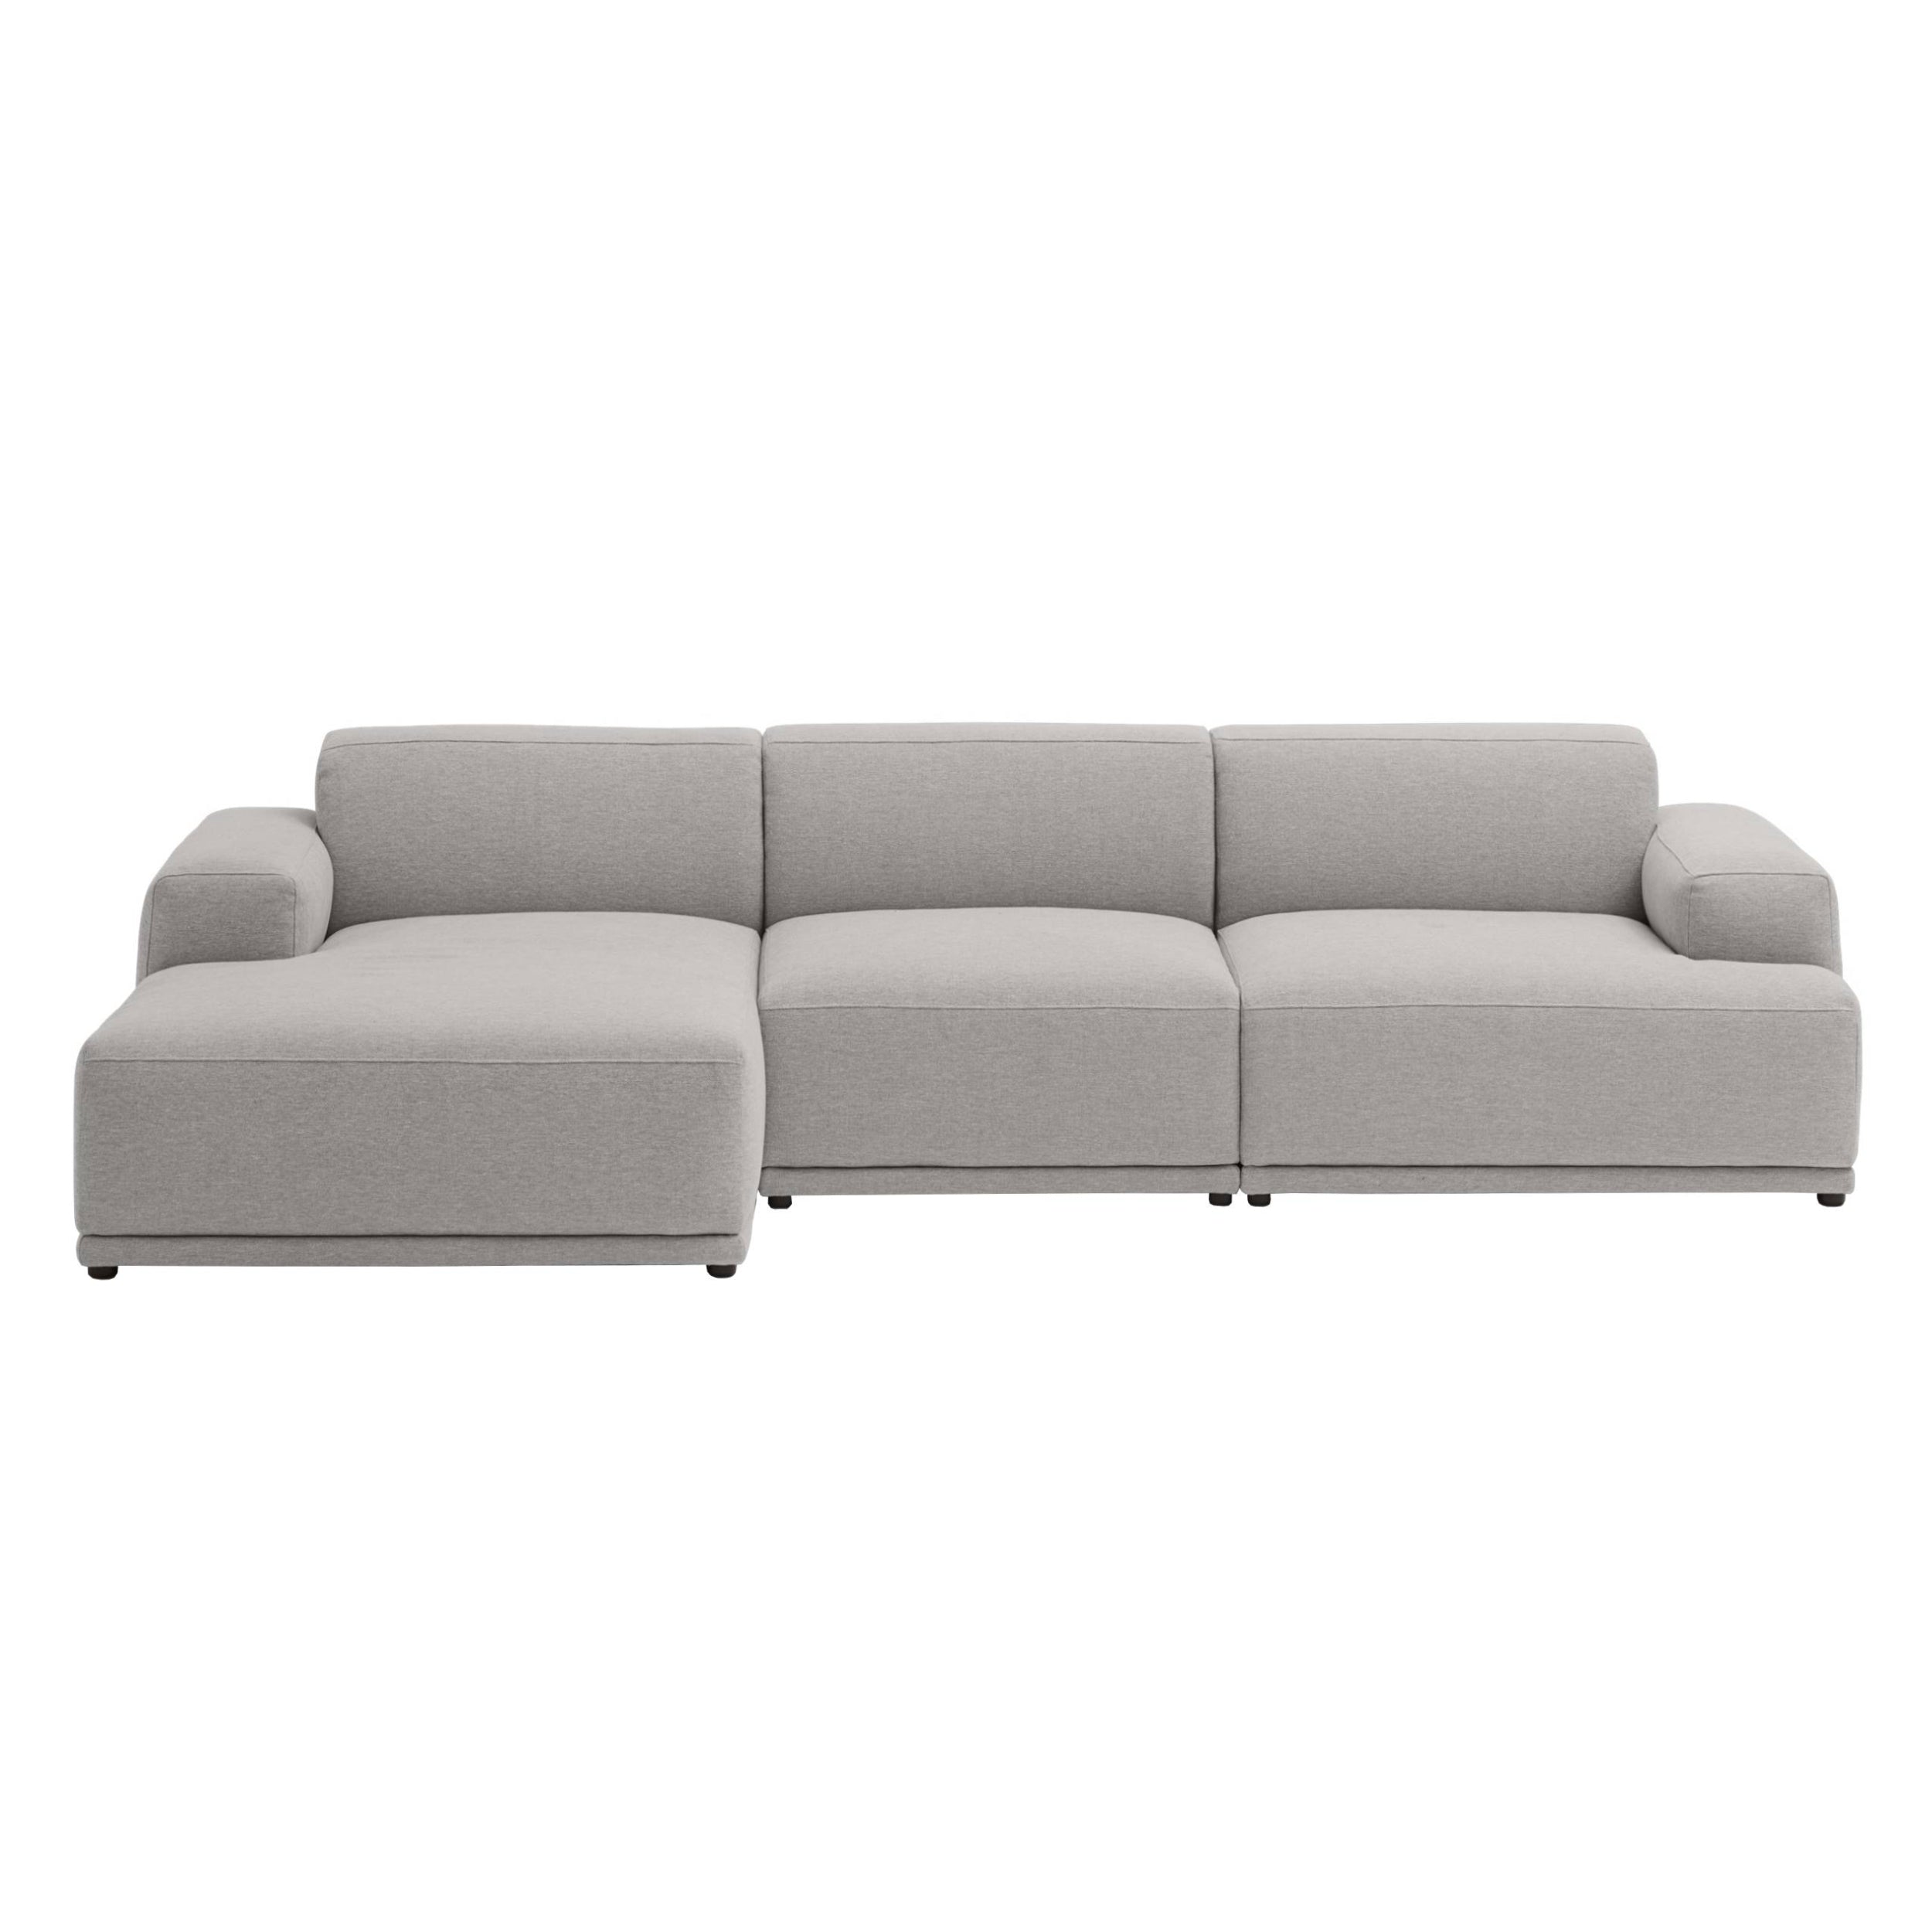 Connect Soft Modular Sofa: 3 Seater + Configuration 3 + Clay 12